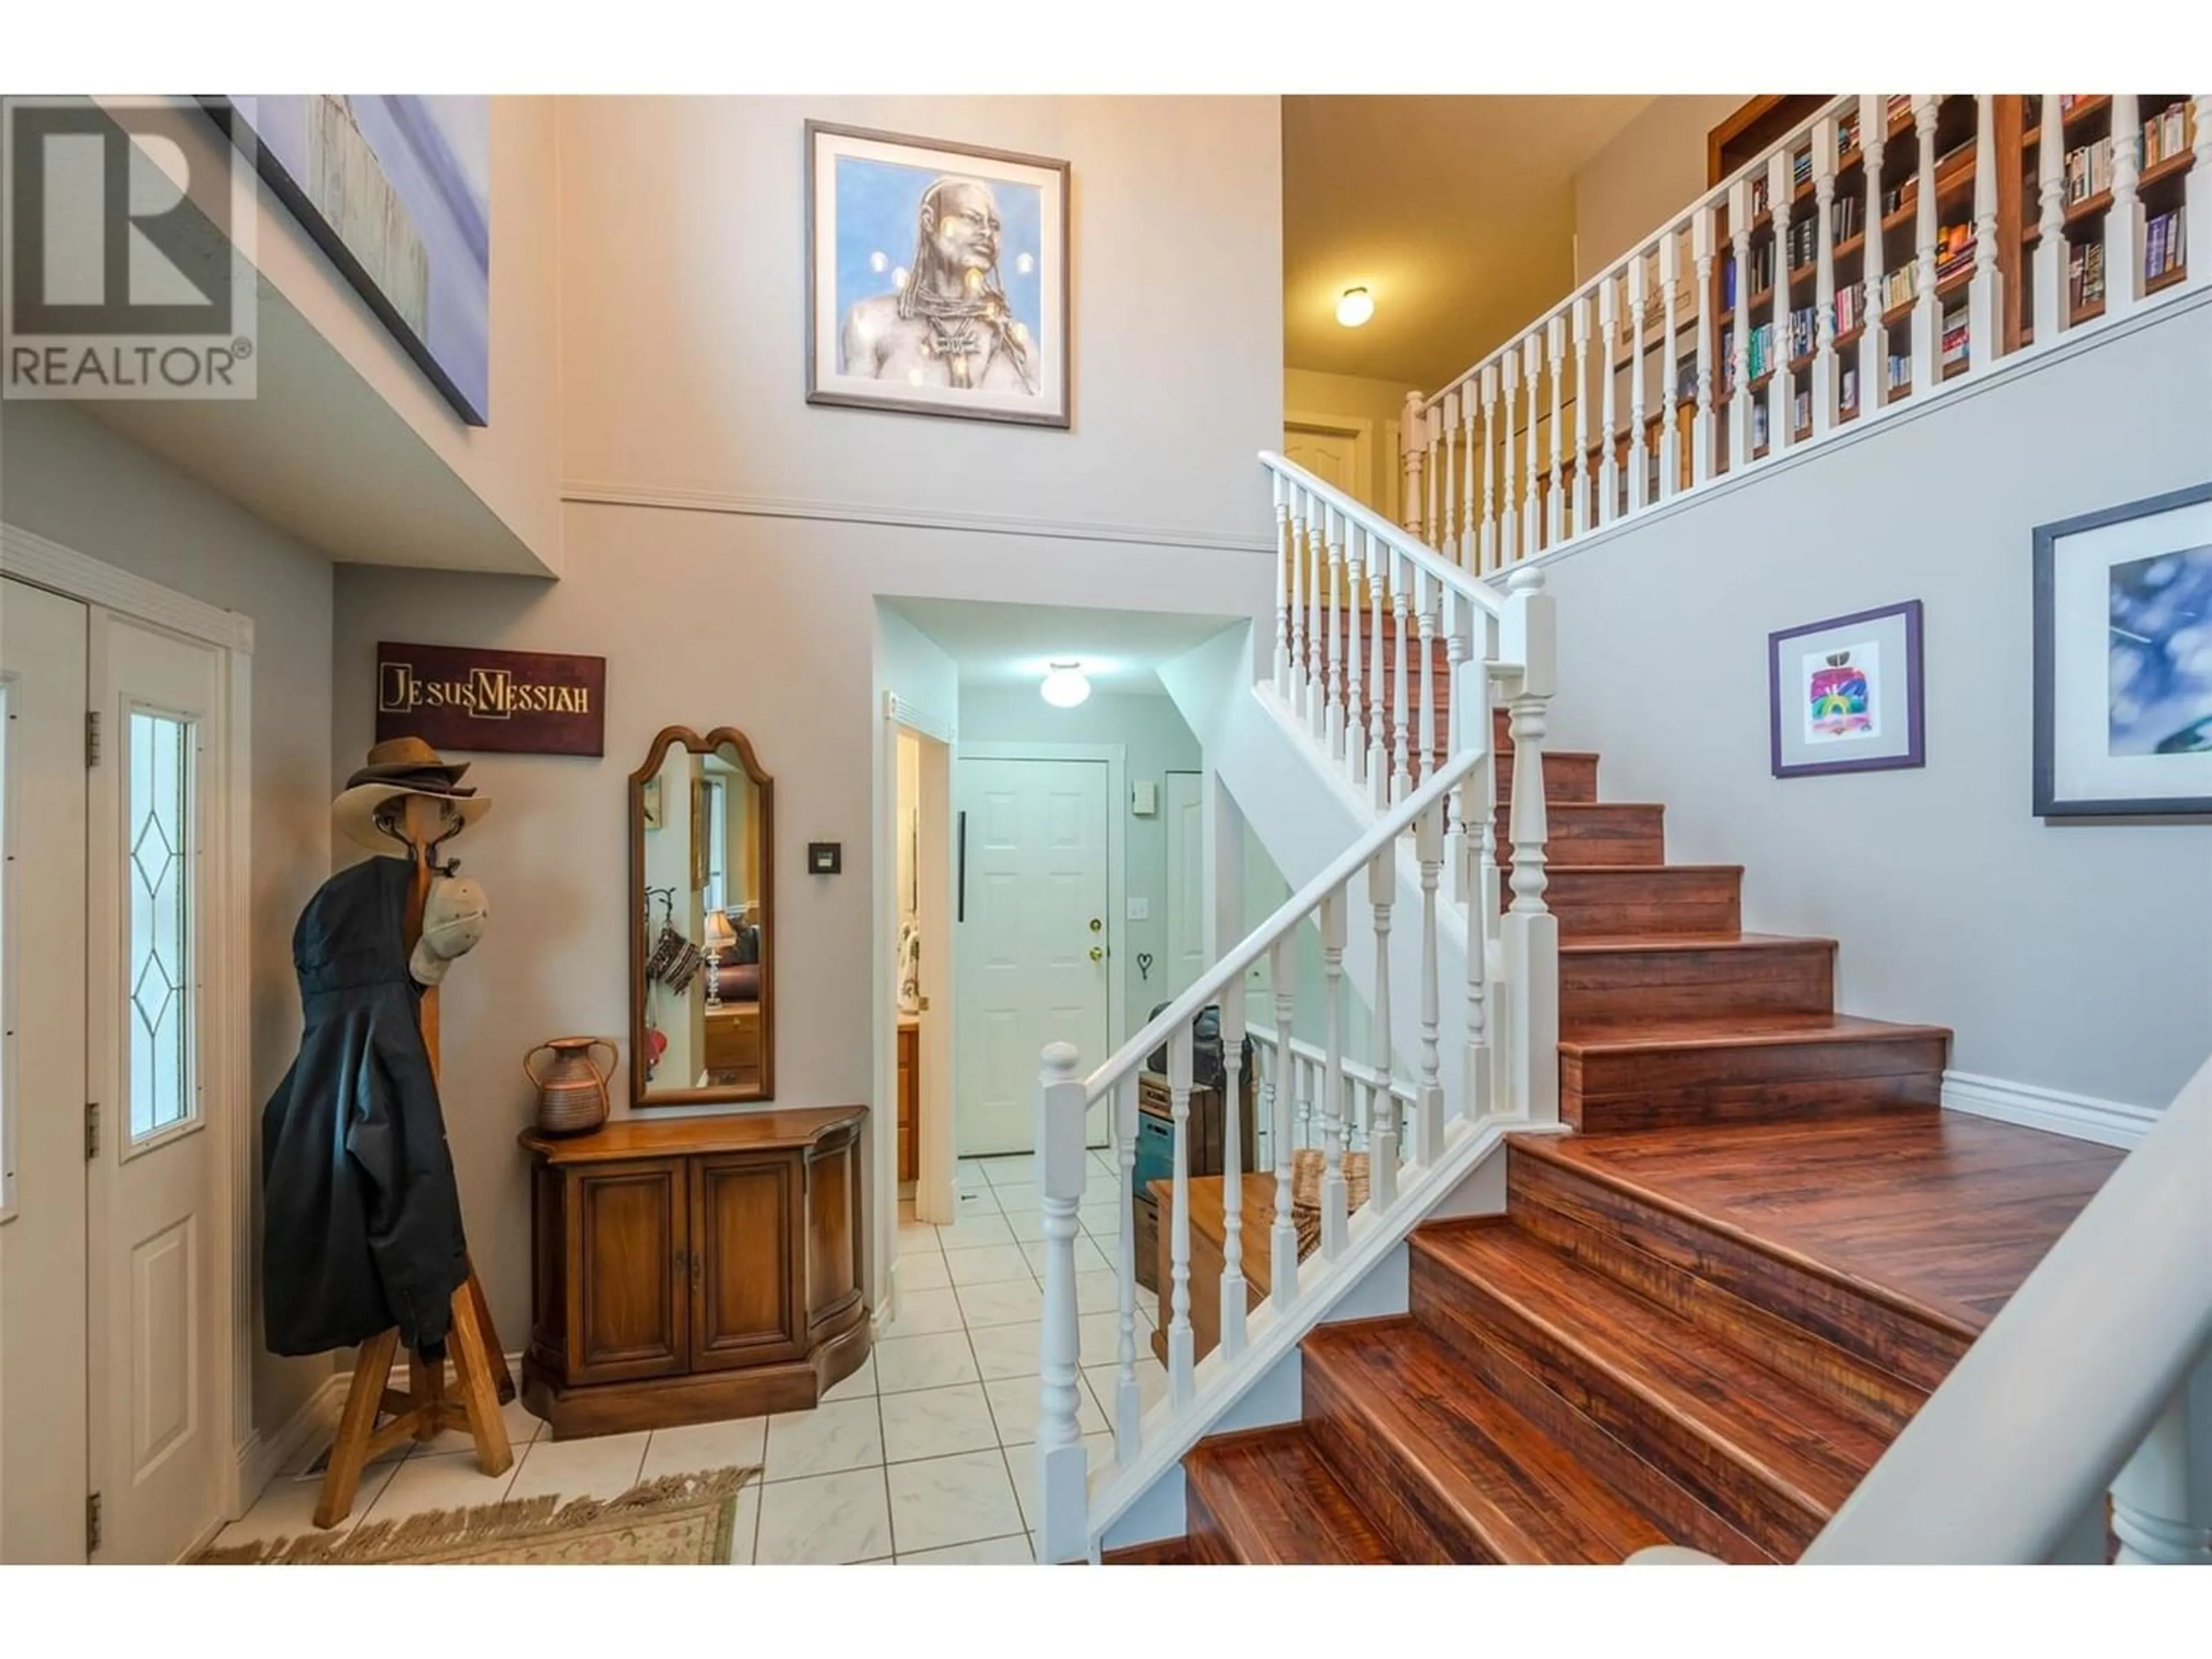 Indoor foyer for 166 Heather Place, Penticton British Columbia V2A8B3